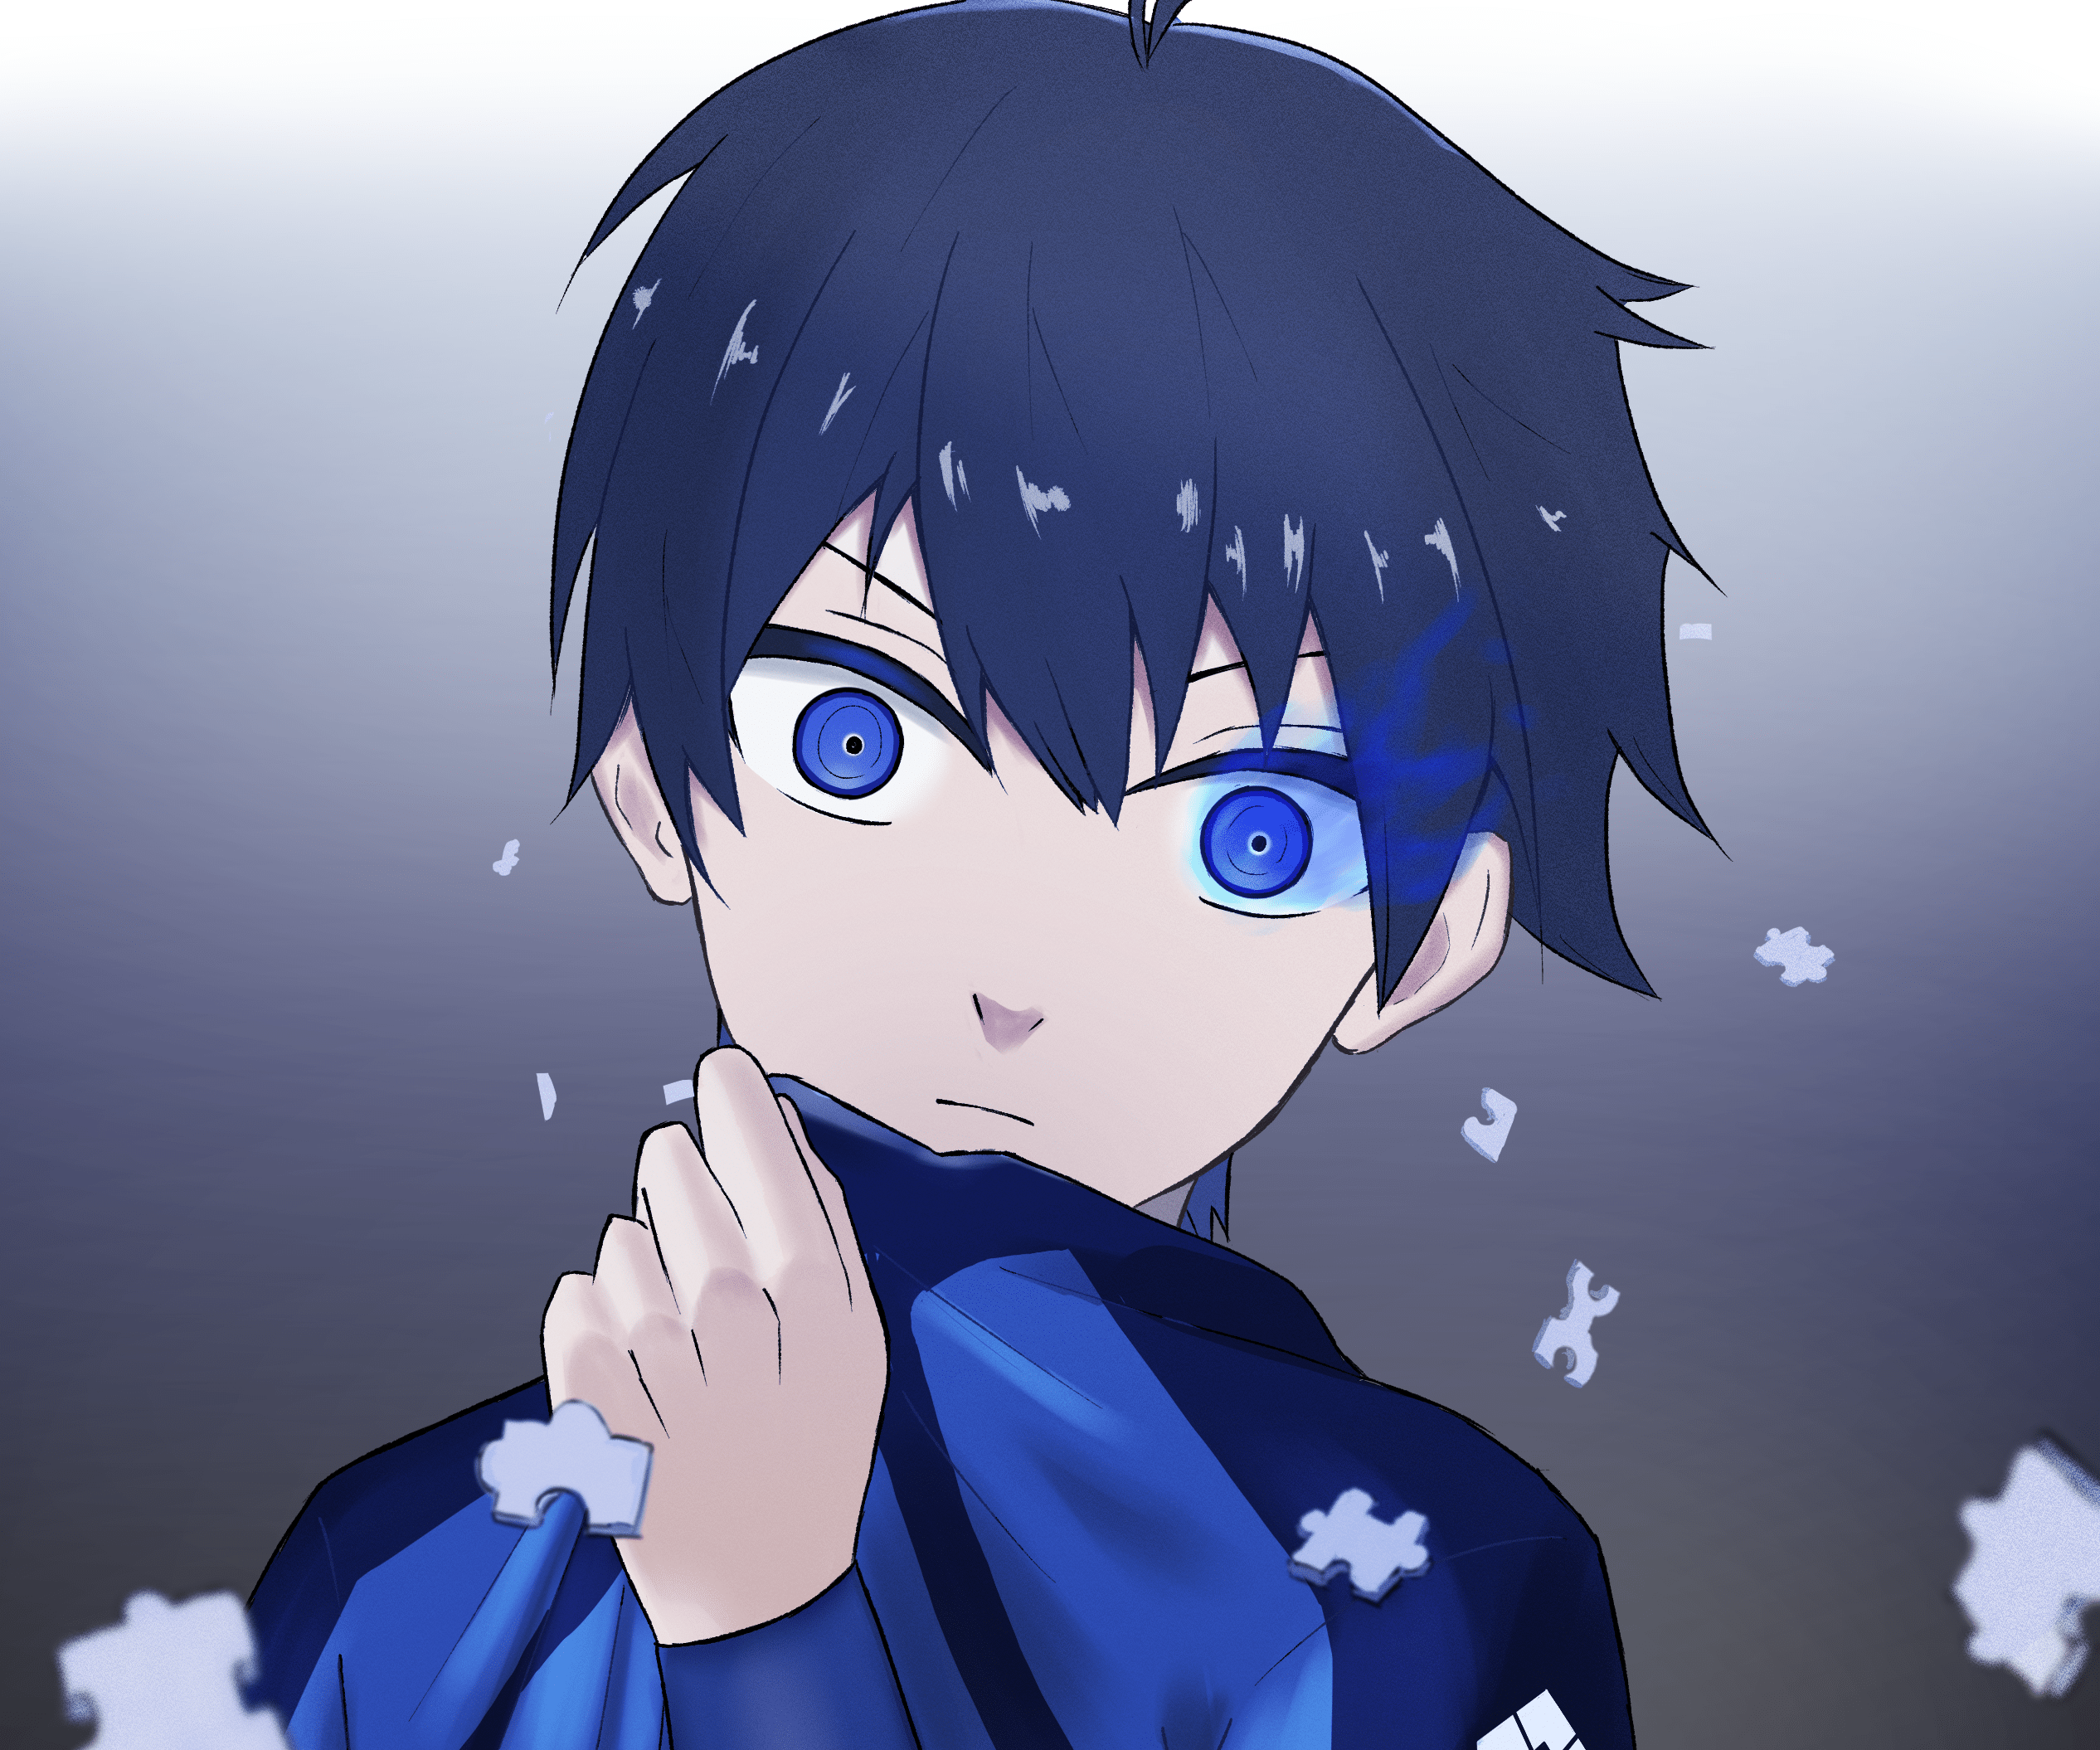 An anime character with blue eyes and black hair - Blue anime